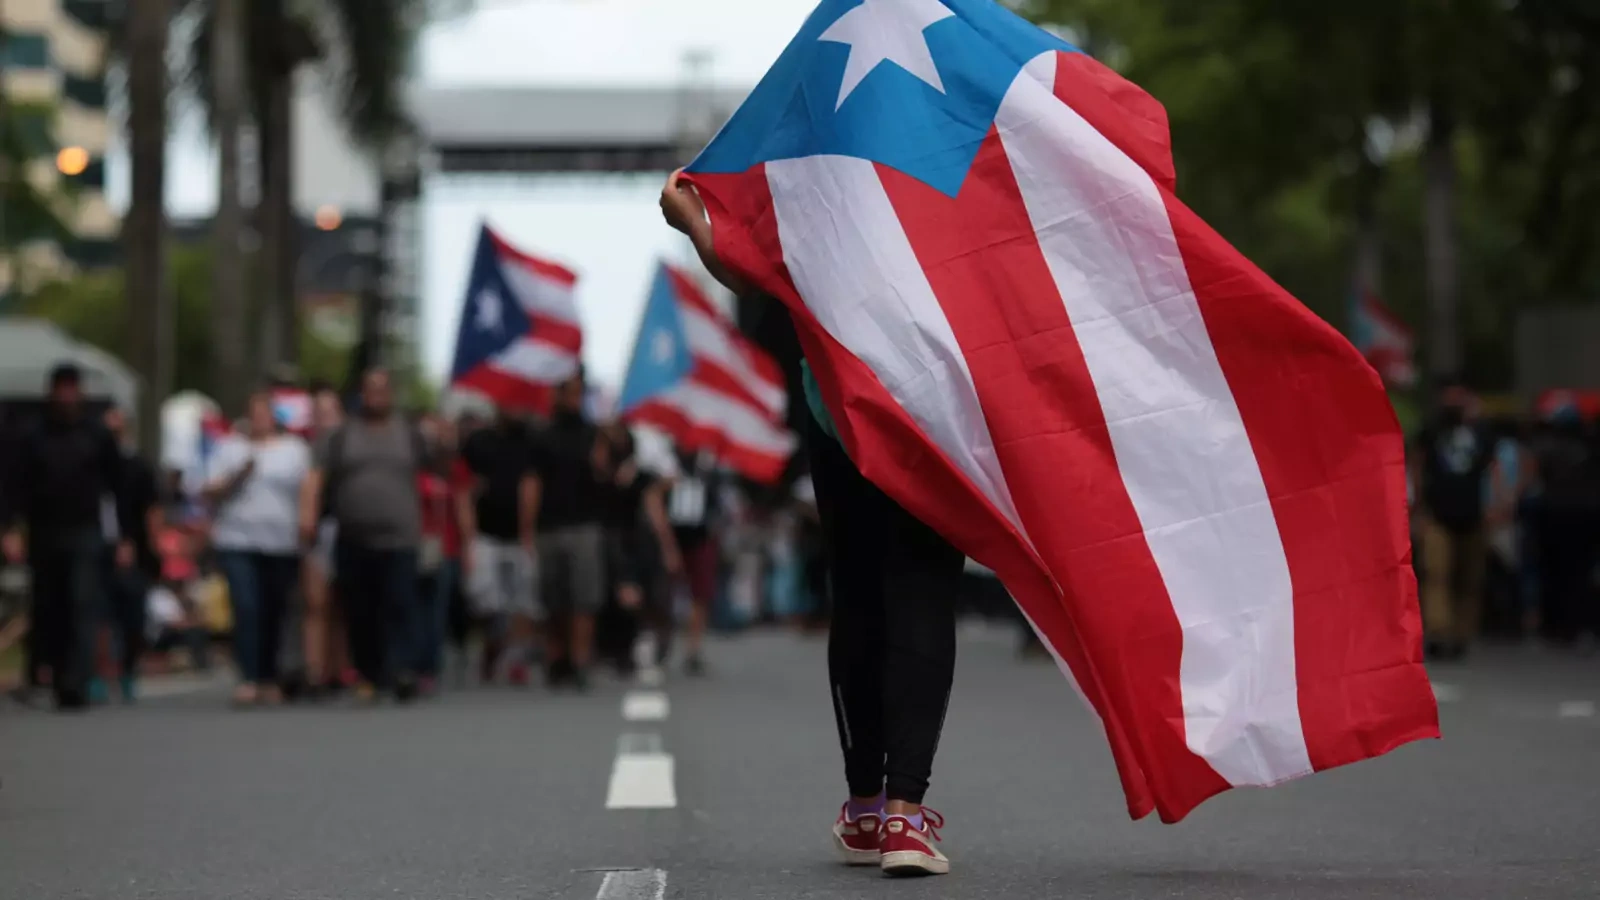 A protester carries a Puerto Rican flag during a rally opposing the government's austerity measures.